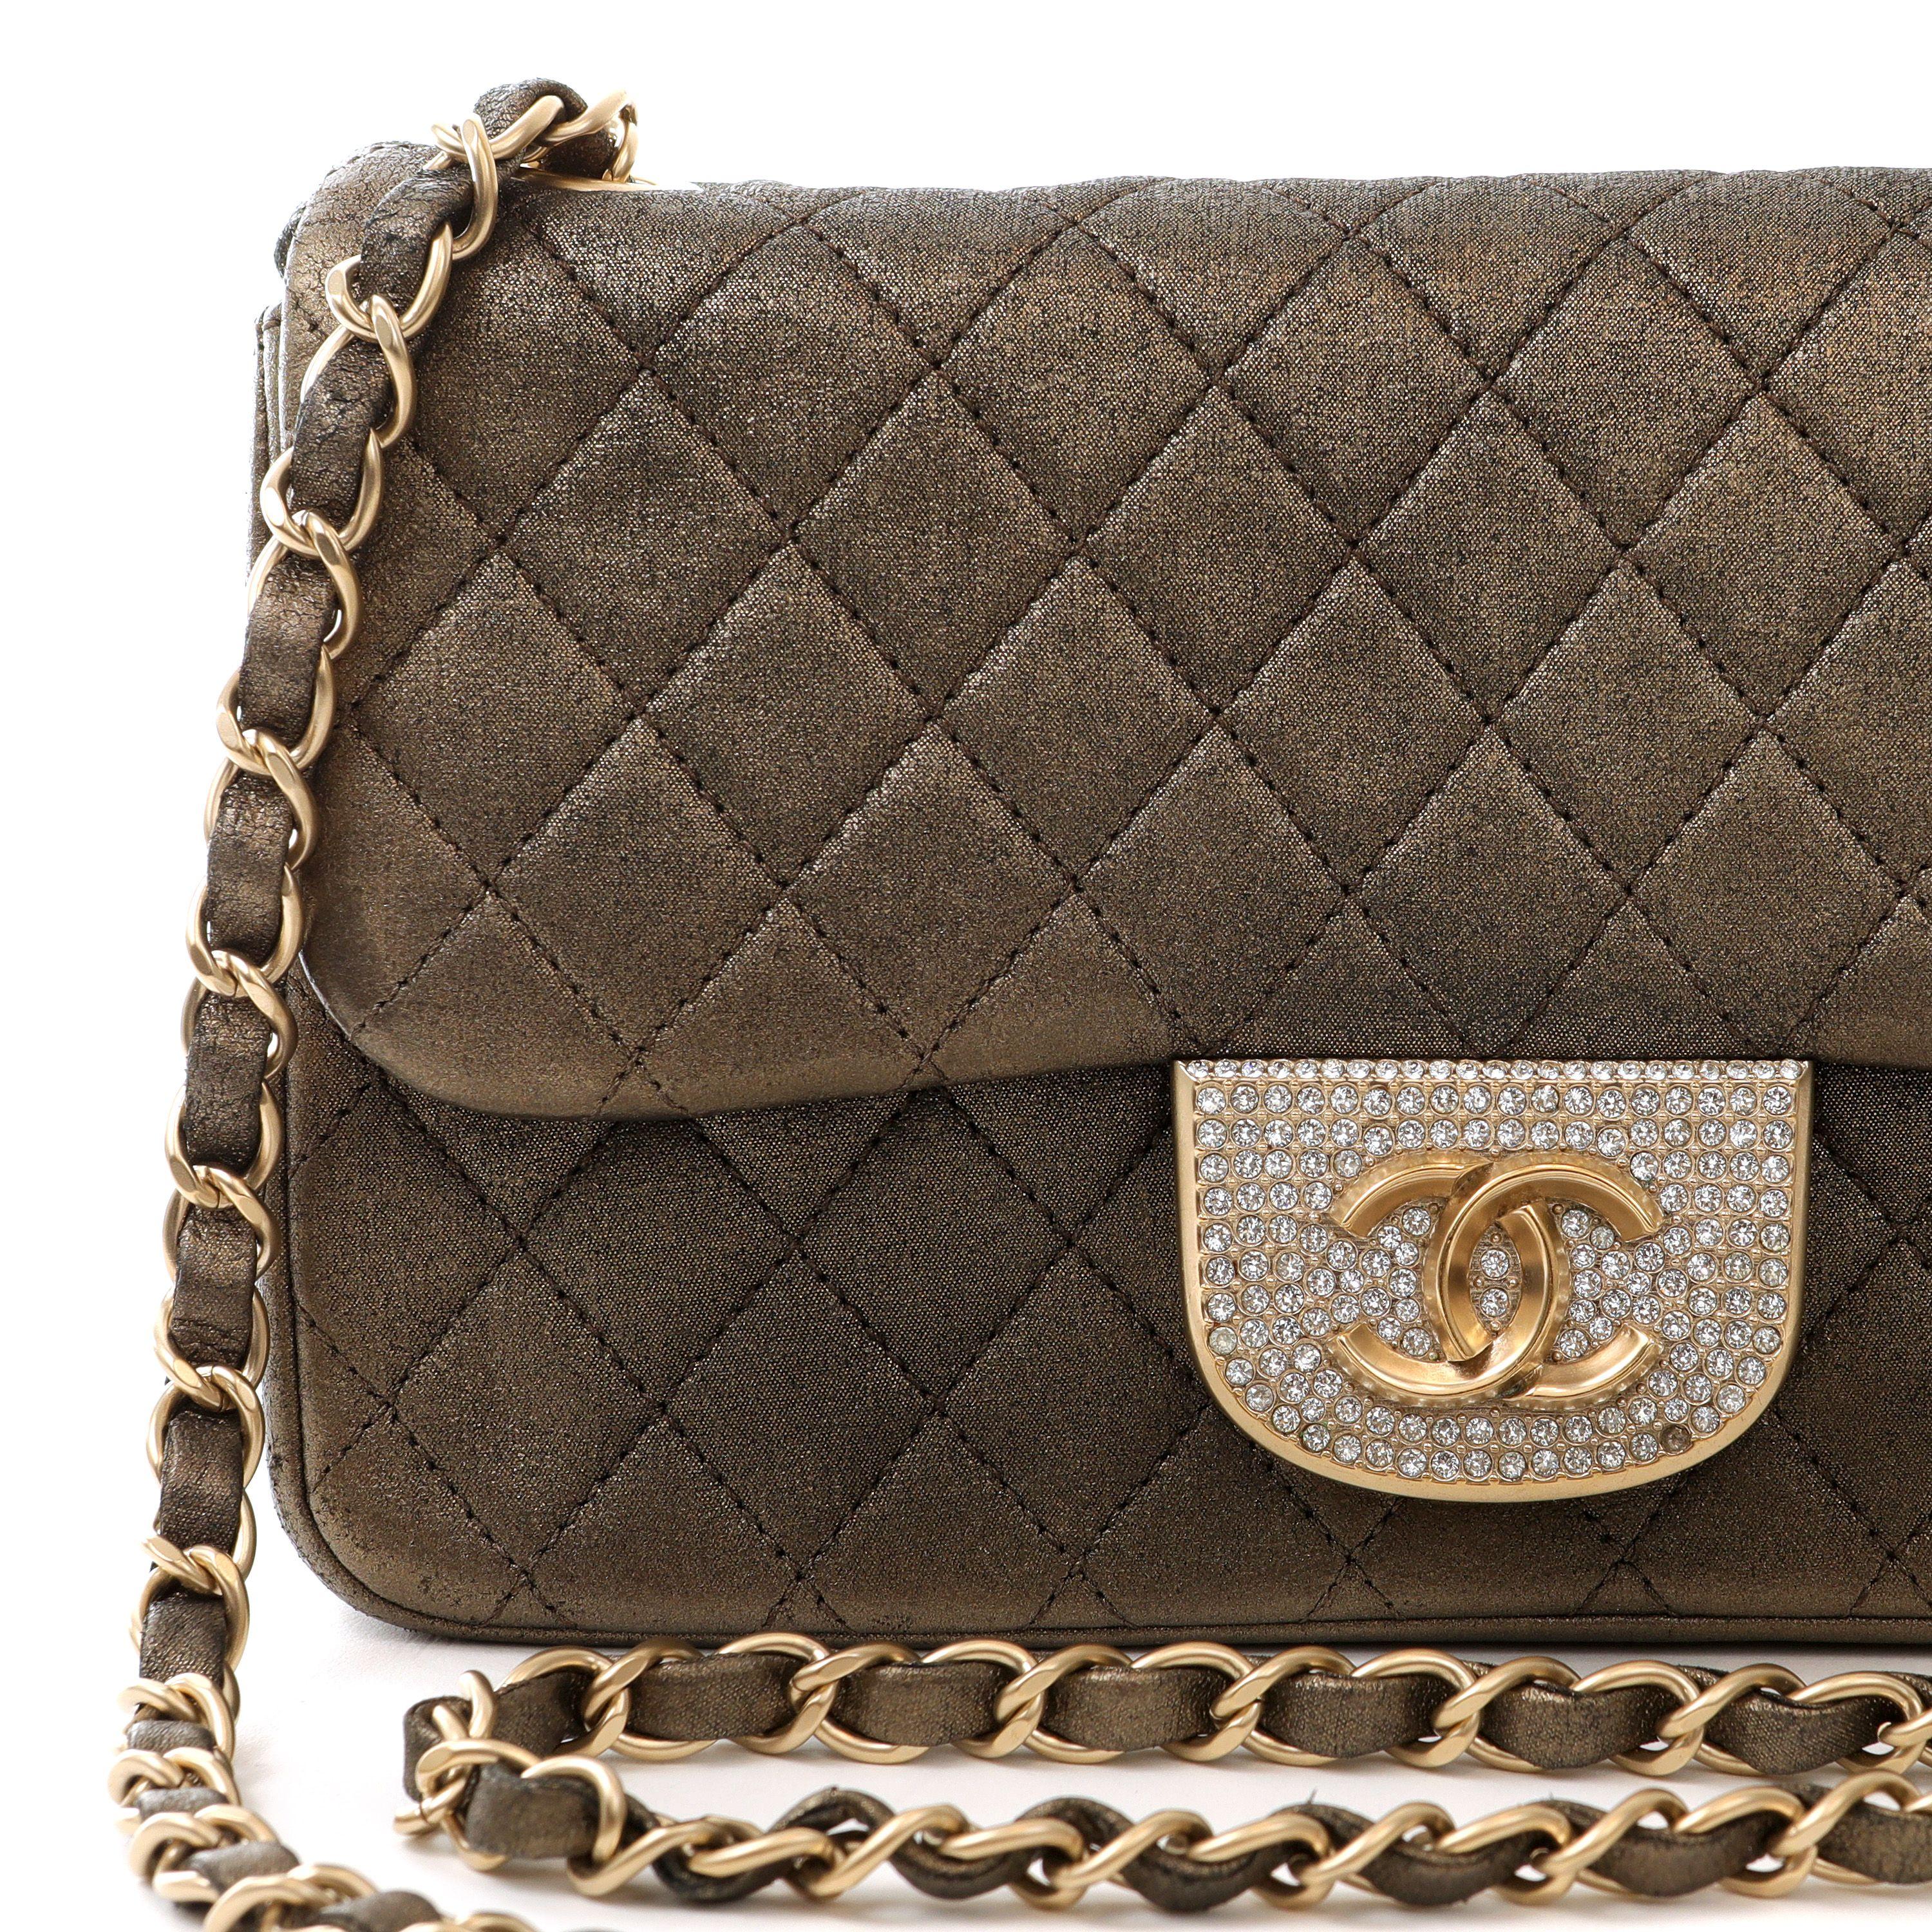 This authentic Chanel Metallic Black and Gold Crystal Flap bag is an exquisite piece in pristine condition.  Subtly metallic black fabric flap bag is quilted in signature Chanel diamond pattern.  Crystal adorned magnetic closure with matte gold